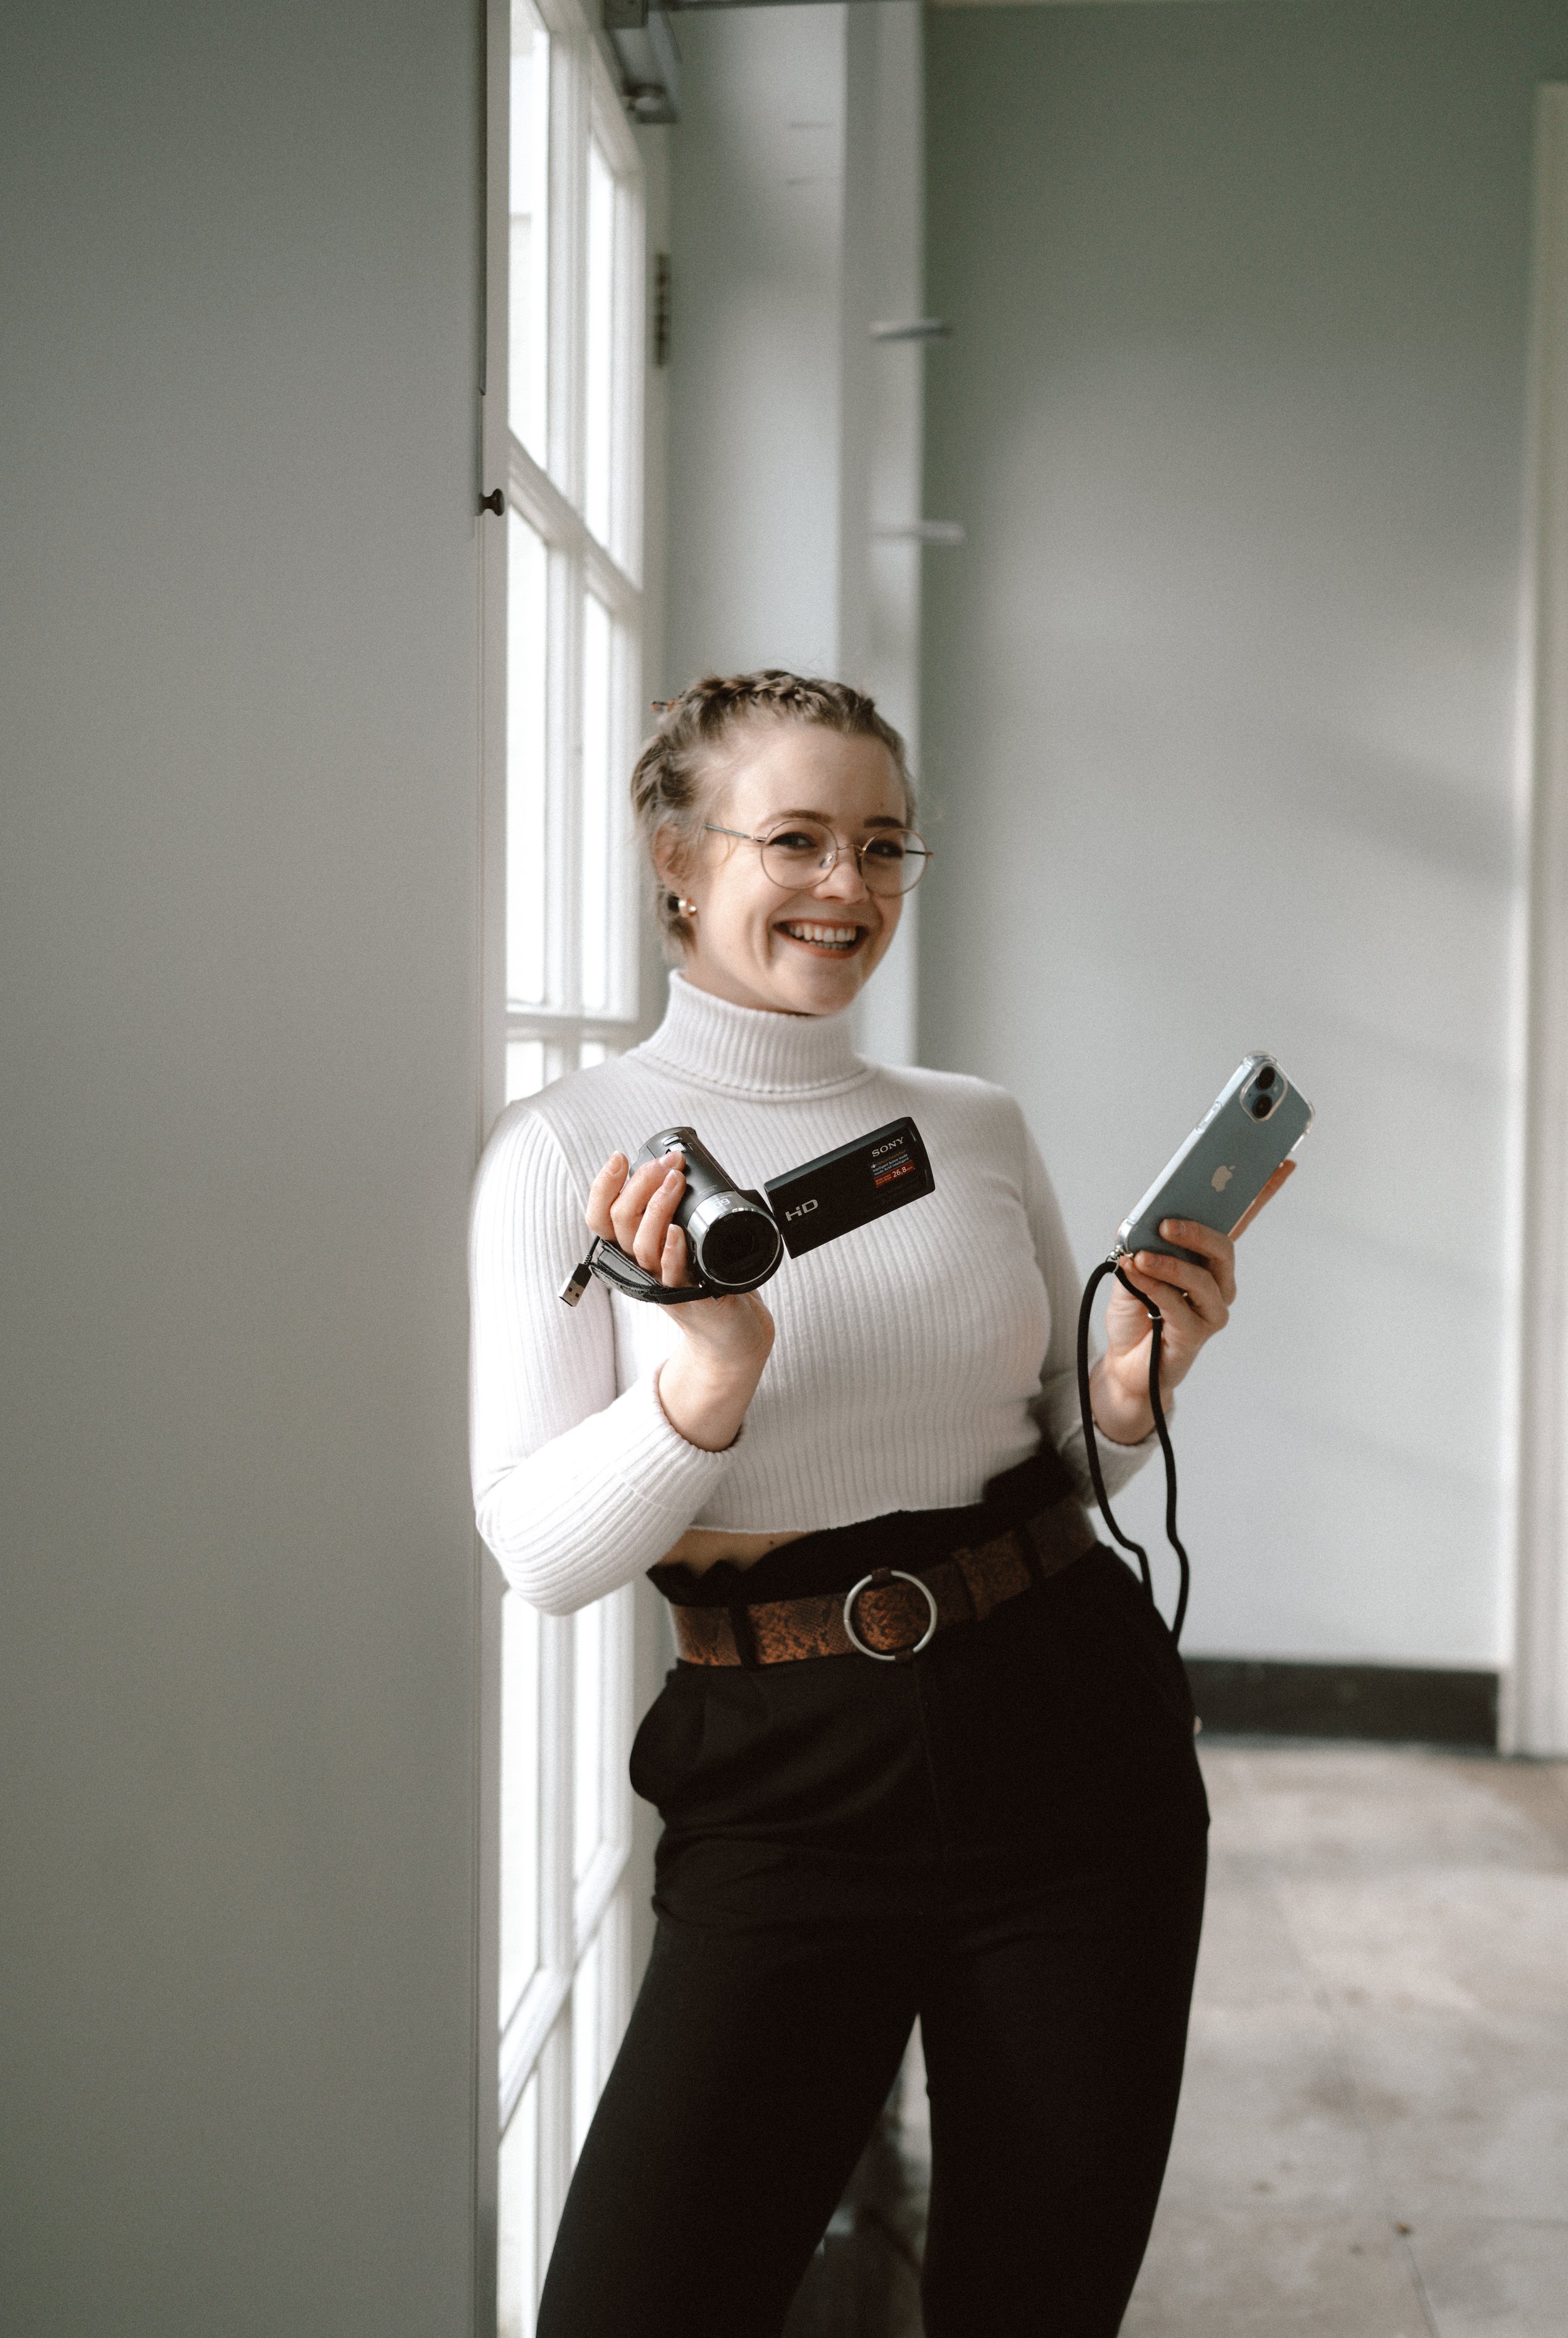 Photo of Alannah Veitch, a wedding content creator. She is a white woman in her twenties, wearing a white jumper and blac trousers. She is leaning against a door holding a video camera